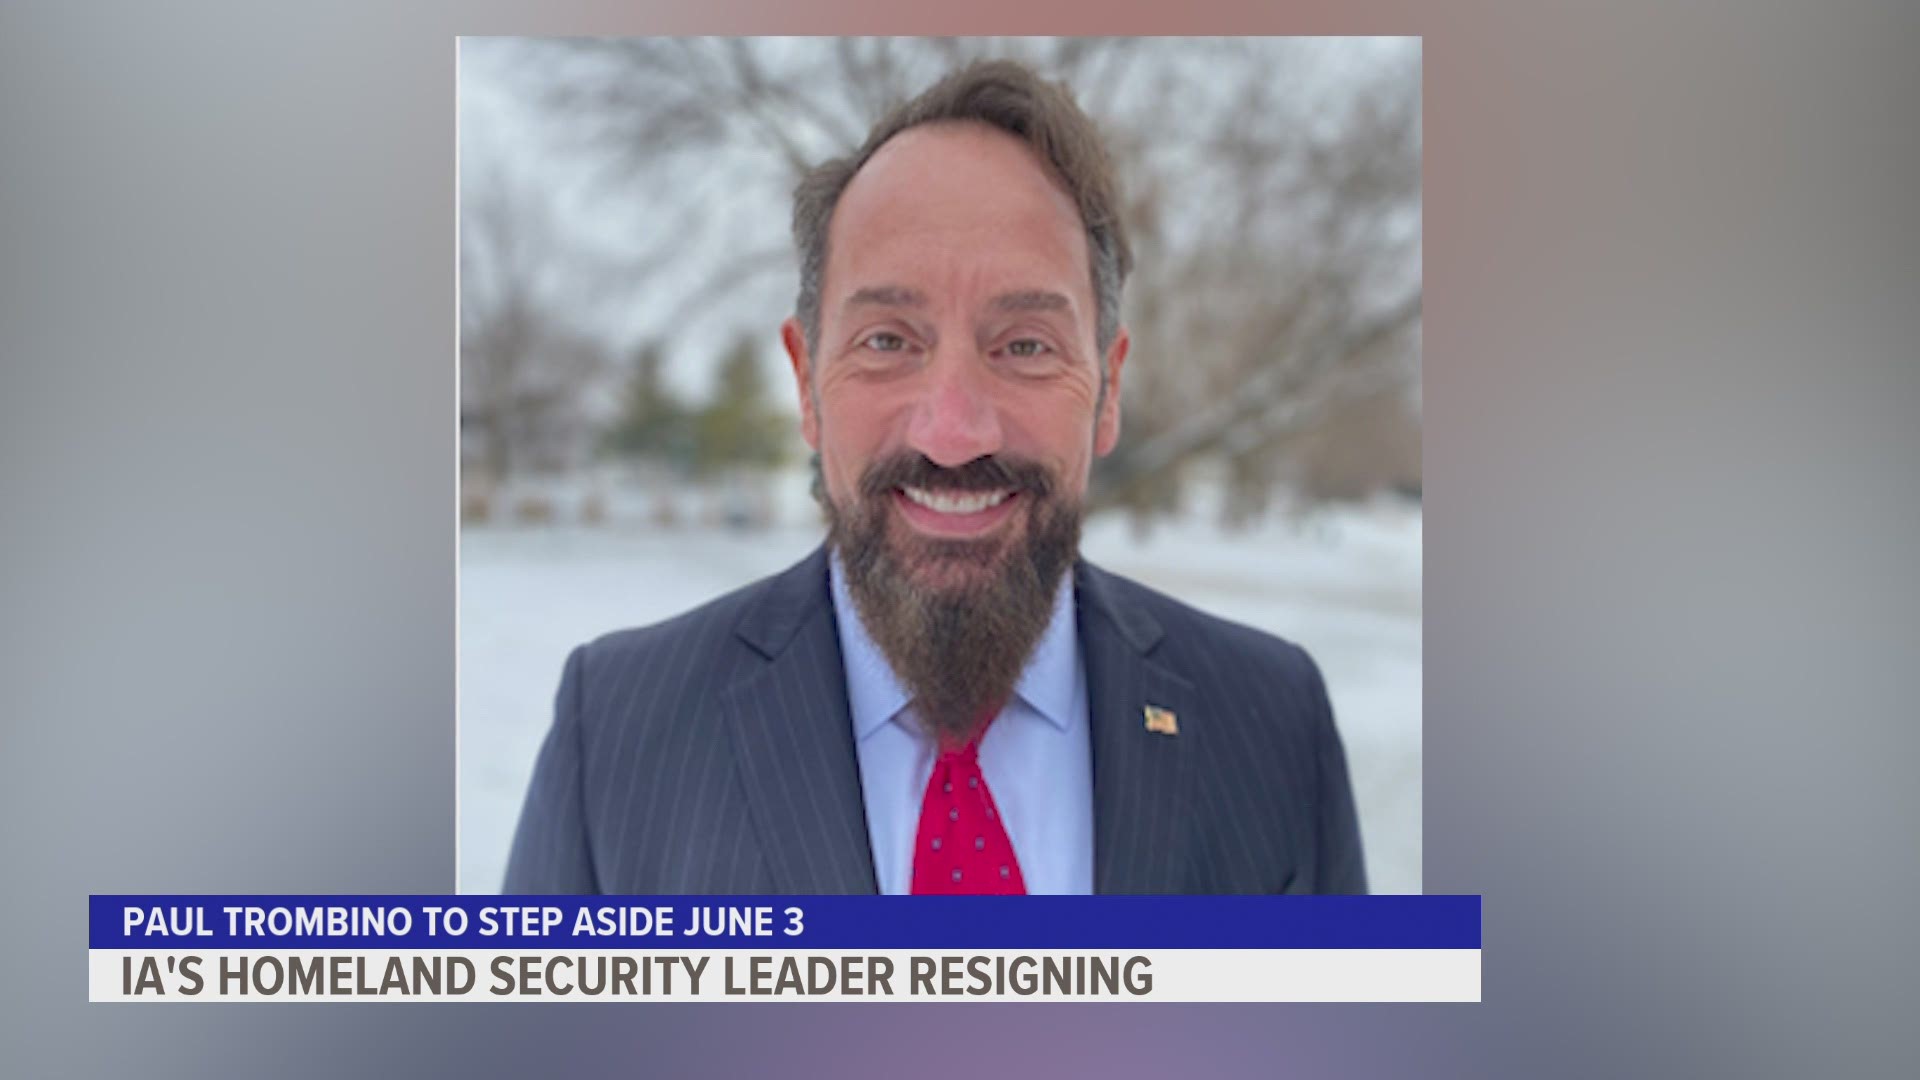 Homeland Security and Emergency Management Director Paul Trombino will leave his role on June 3.